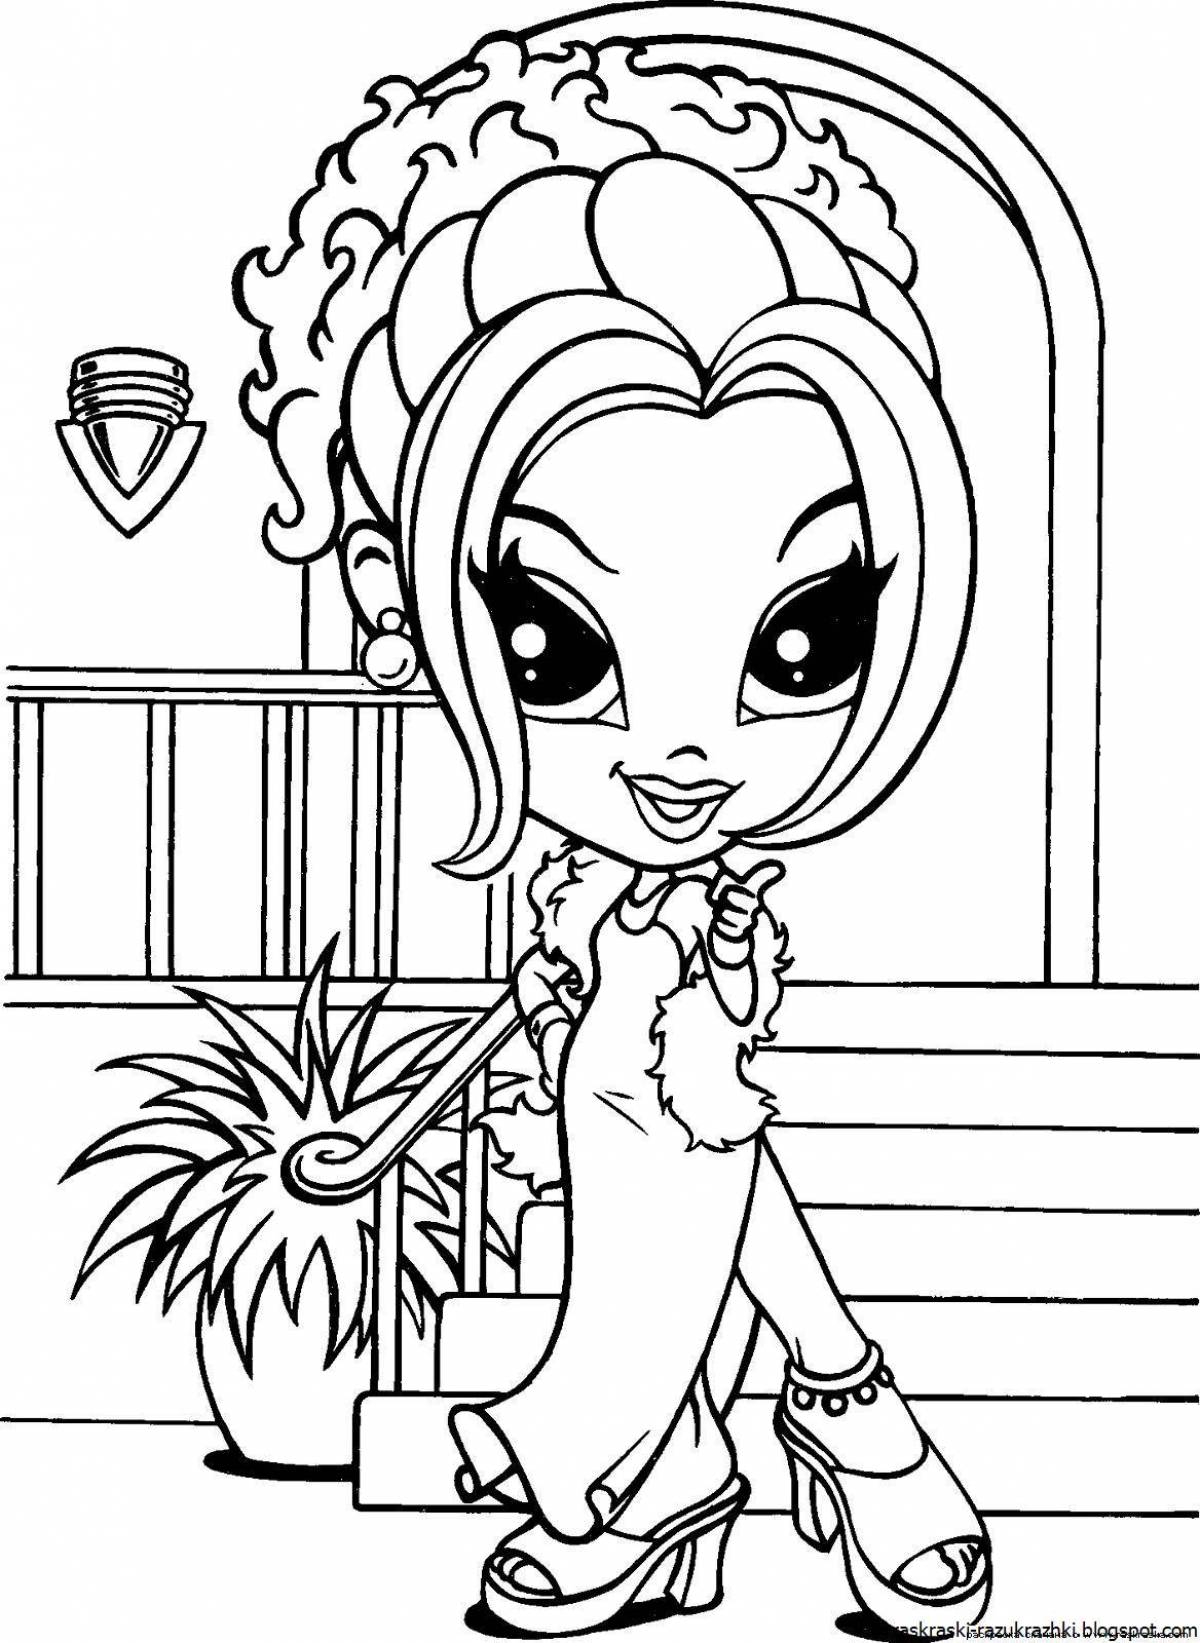 Adorable coloring book for girls